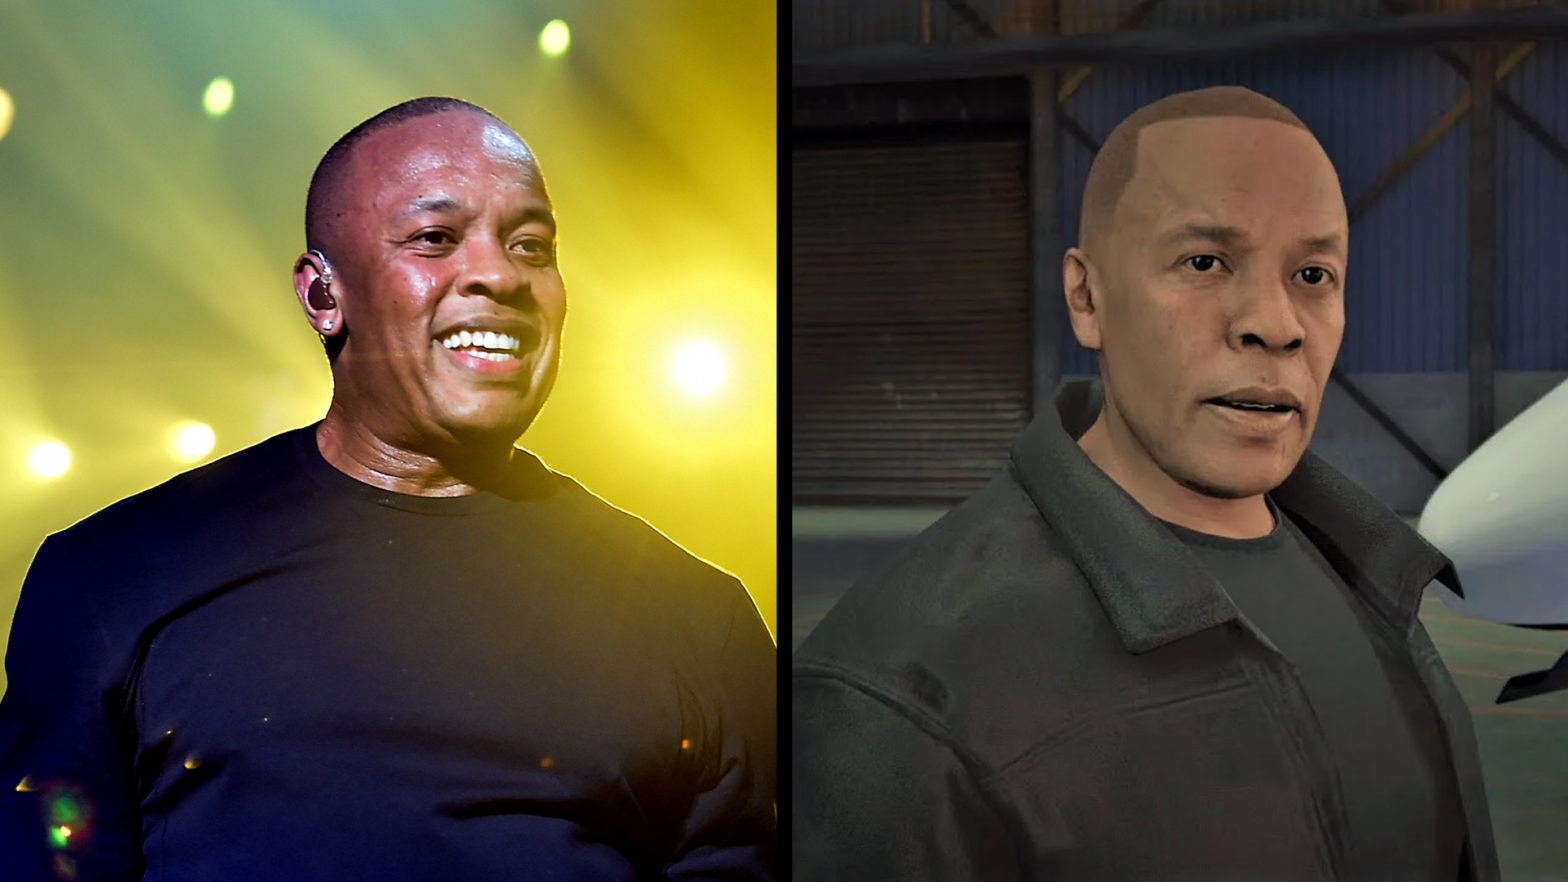 Dr. Dre Is Releasing New Music Through Grand Theft Auto, According To Snoop Dogg